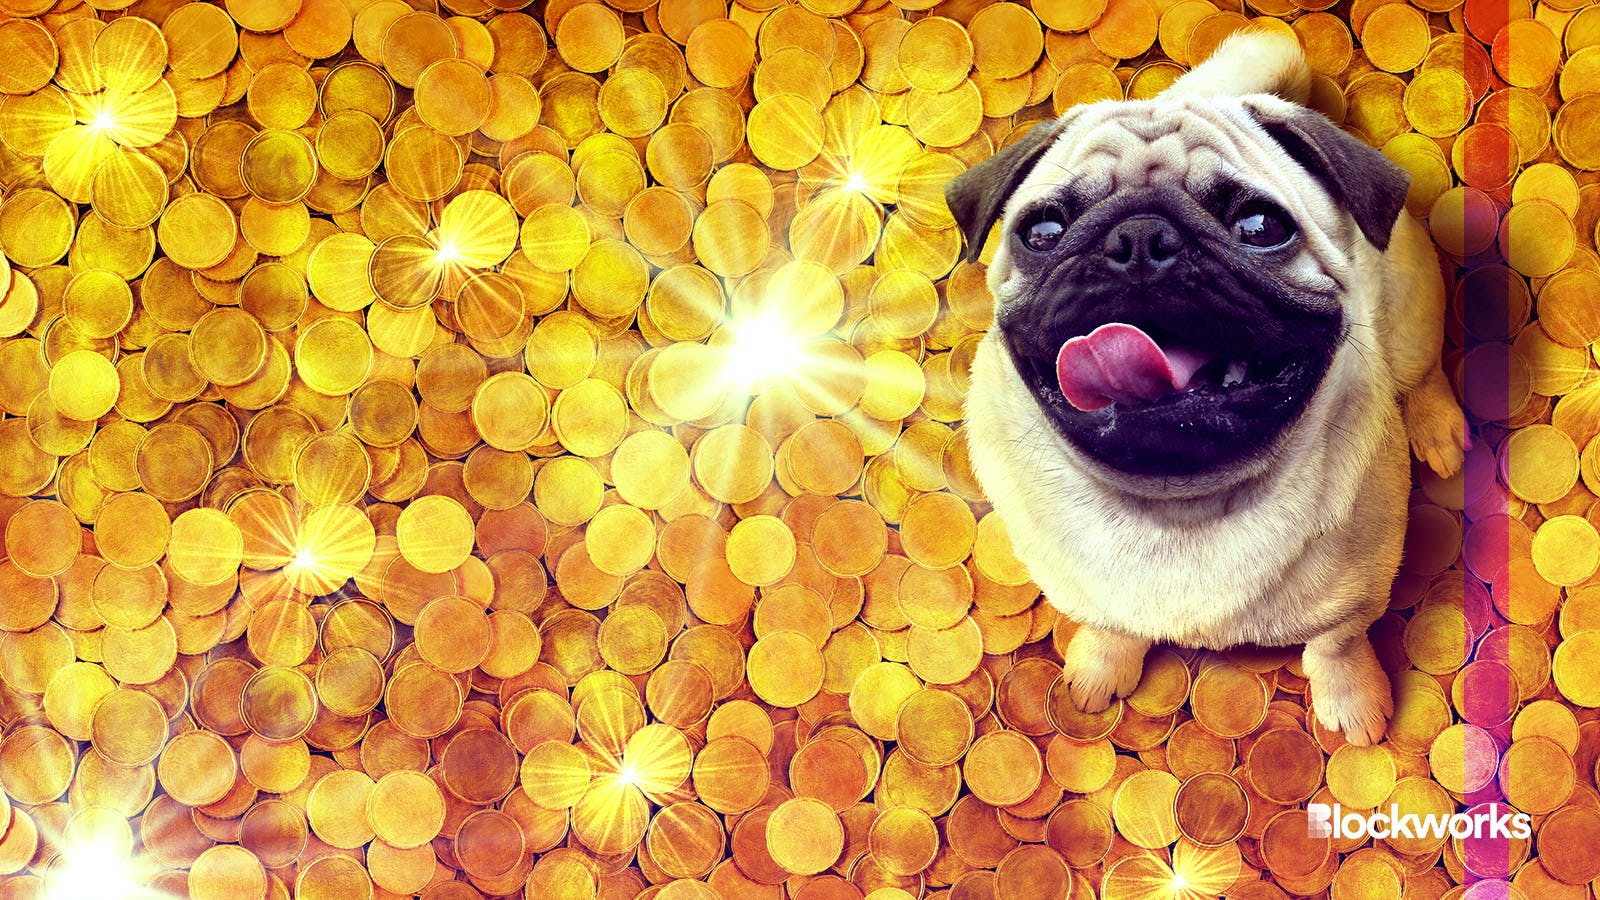 Dog coins are back: BONK leads Dogecoin, Floki and Shiba with 1400% rally